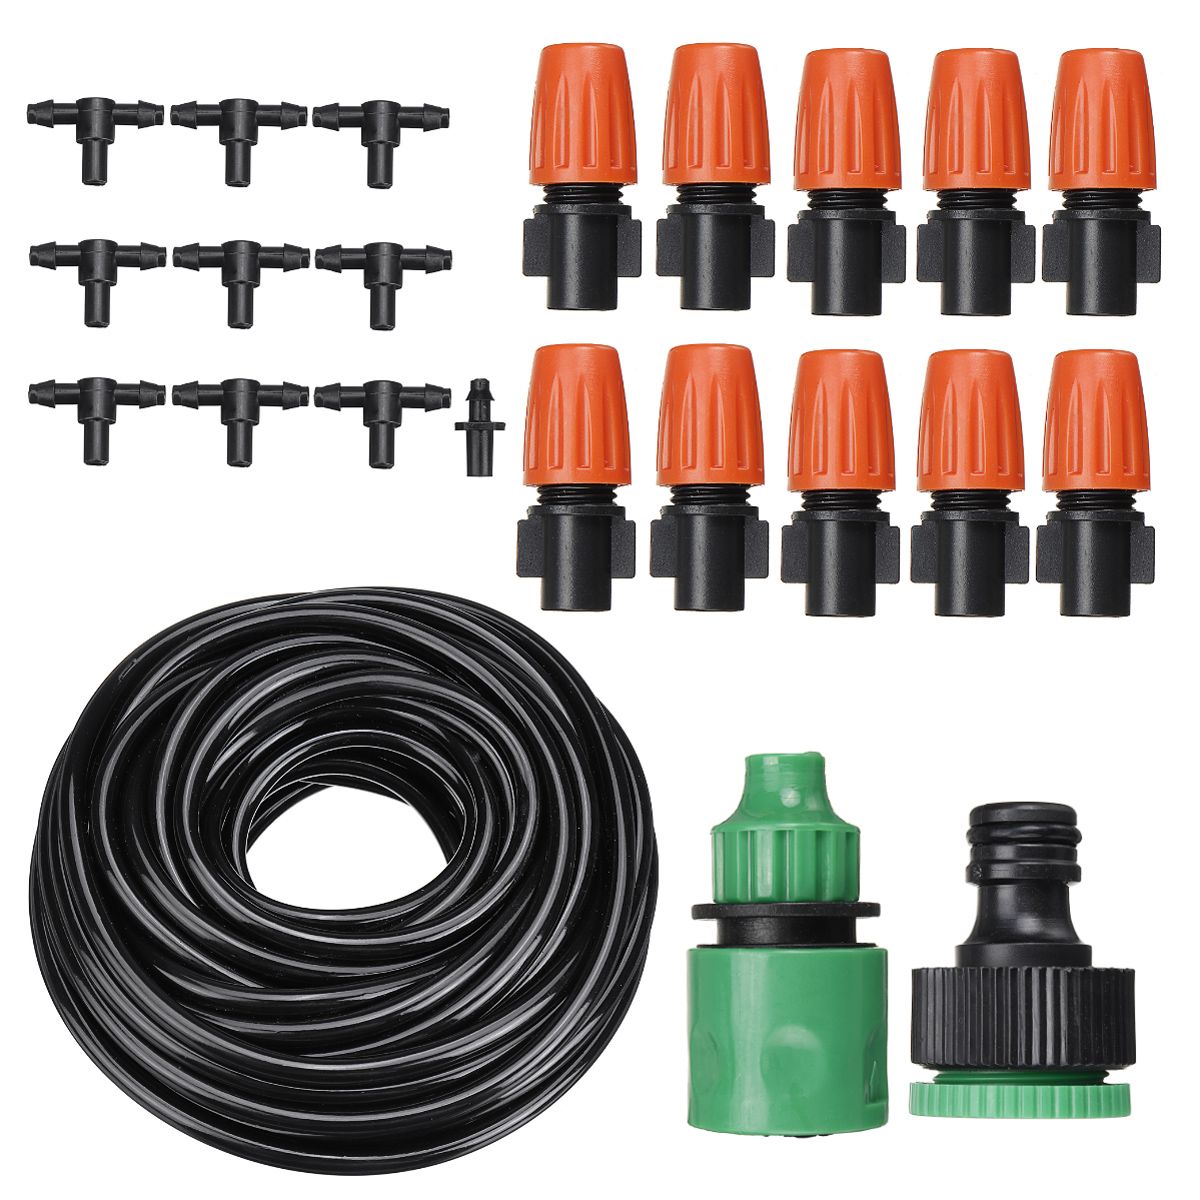 3313391191Pcs-Automatic-Drip-Irrigation-Controller-System-Kit-Micro-Sprinkler-Garden-Watering-1670658